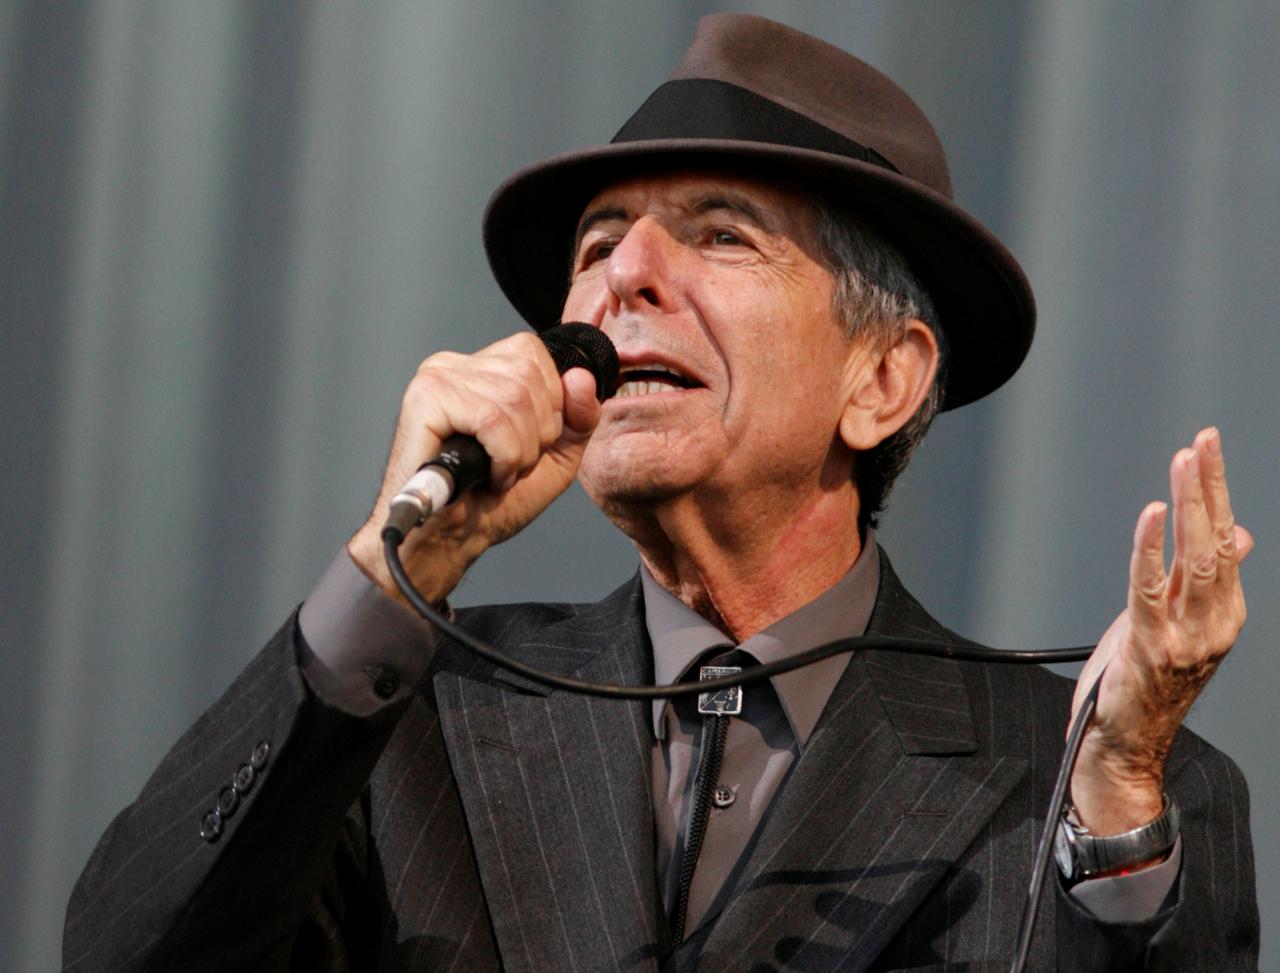 leonard cohen s hallelujah played at republican convention without estate s approval